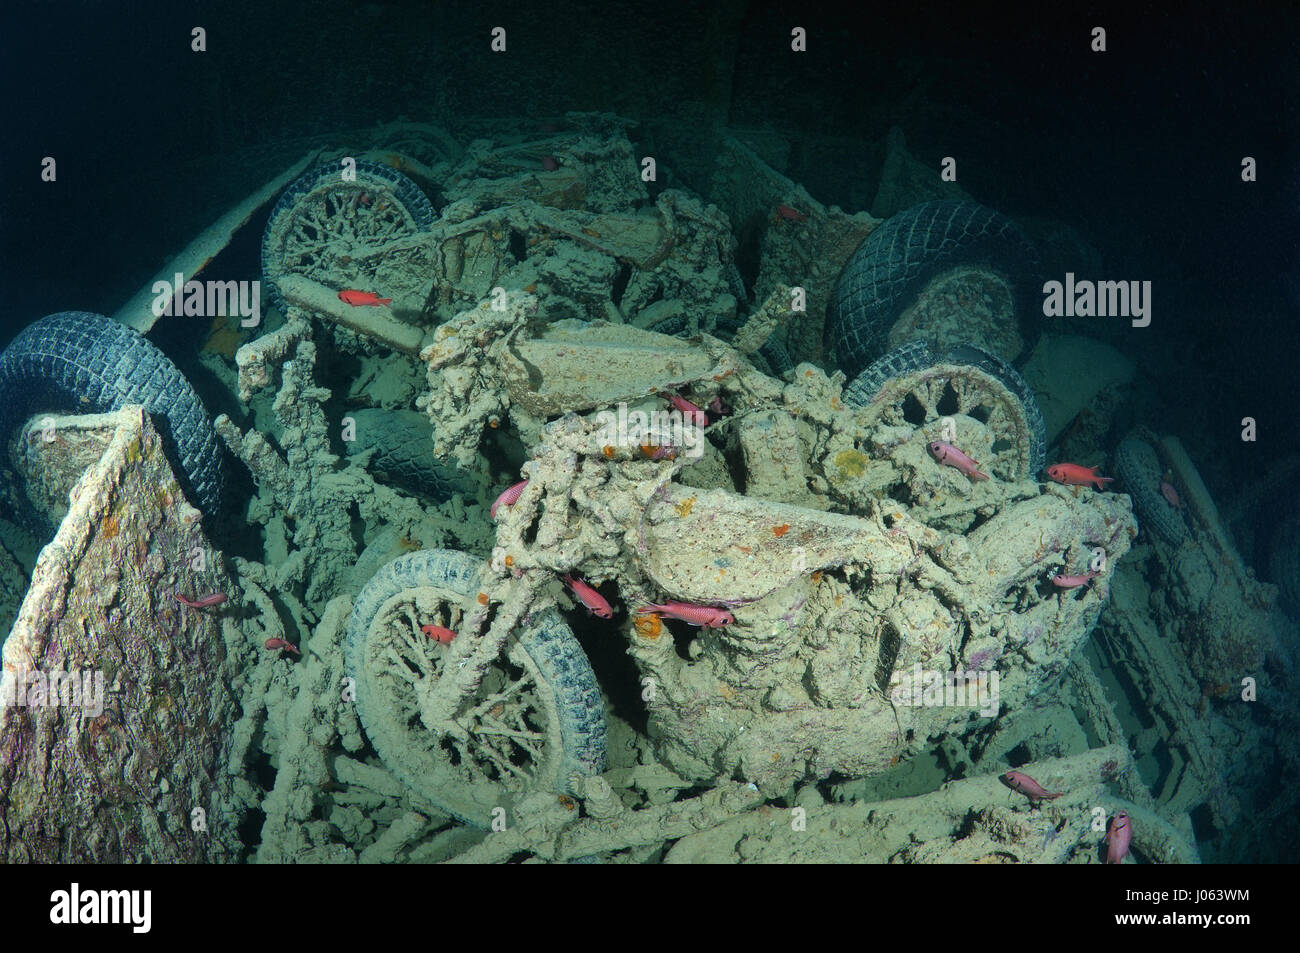 Some of the many motorcycles that were sunken with the ship. EERIE underwater pictures show inside the wreckage of the sunken British World War Two ship SS Thistlegorm on the seventy-fifth anniversary of her sinking. The series of images show the rusted remains of the merchant navy ship’s cargo which includes motorbikes, army trucks and an aircraft propeller. Other pictures show how sea life have been inhabiting the wreckage. Stock Photo